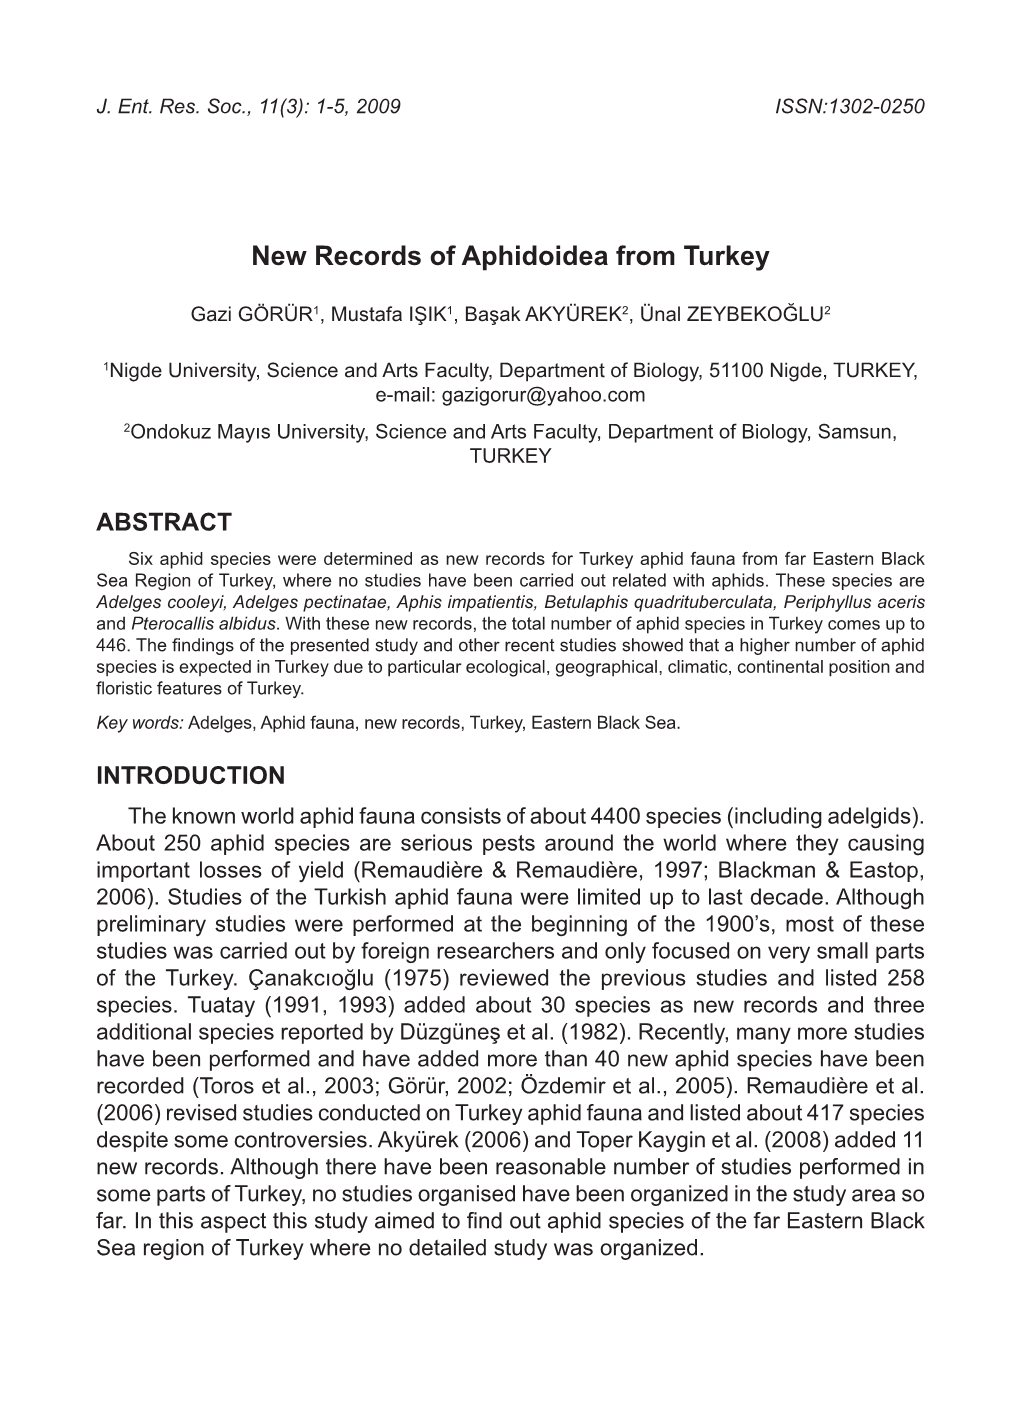 New Records of Aphidoidea from Turkey